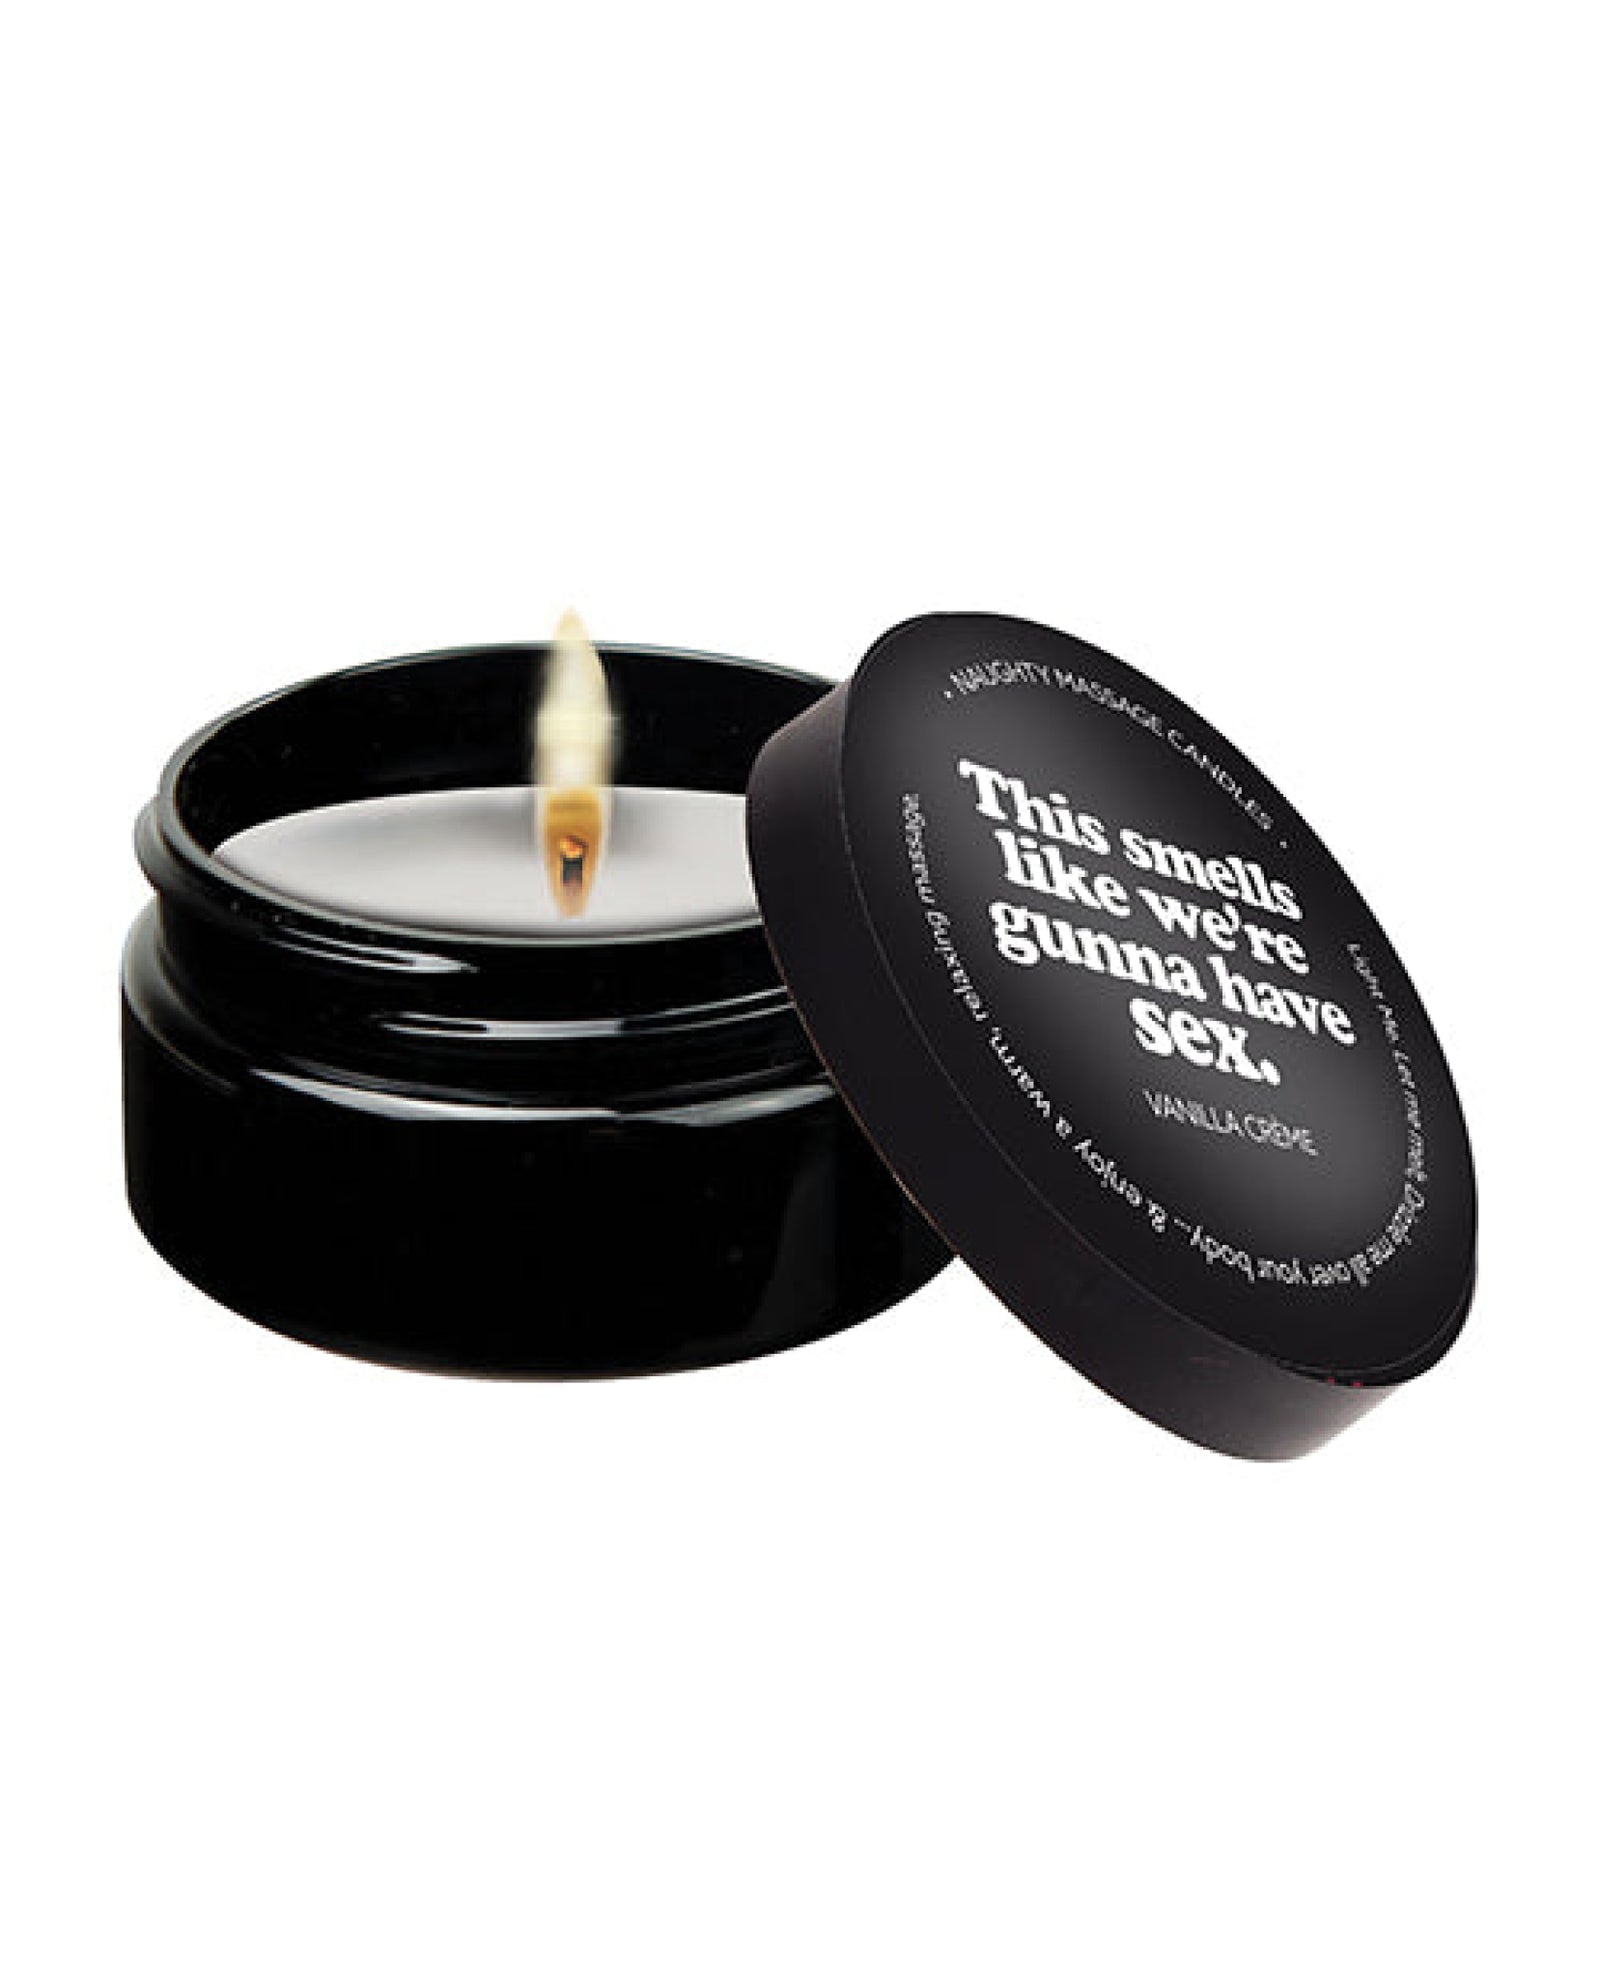 Kama Sutra Mini Massage Candle - 2 Oz This Smells Like We're Gunna Have Sex Kama Sutra